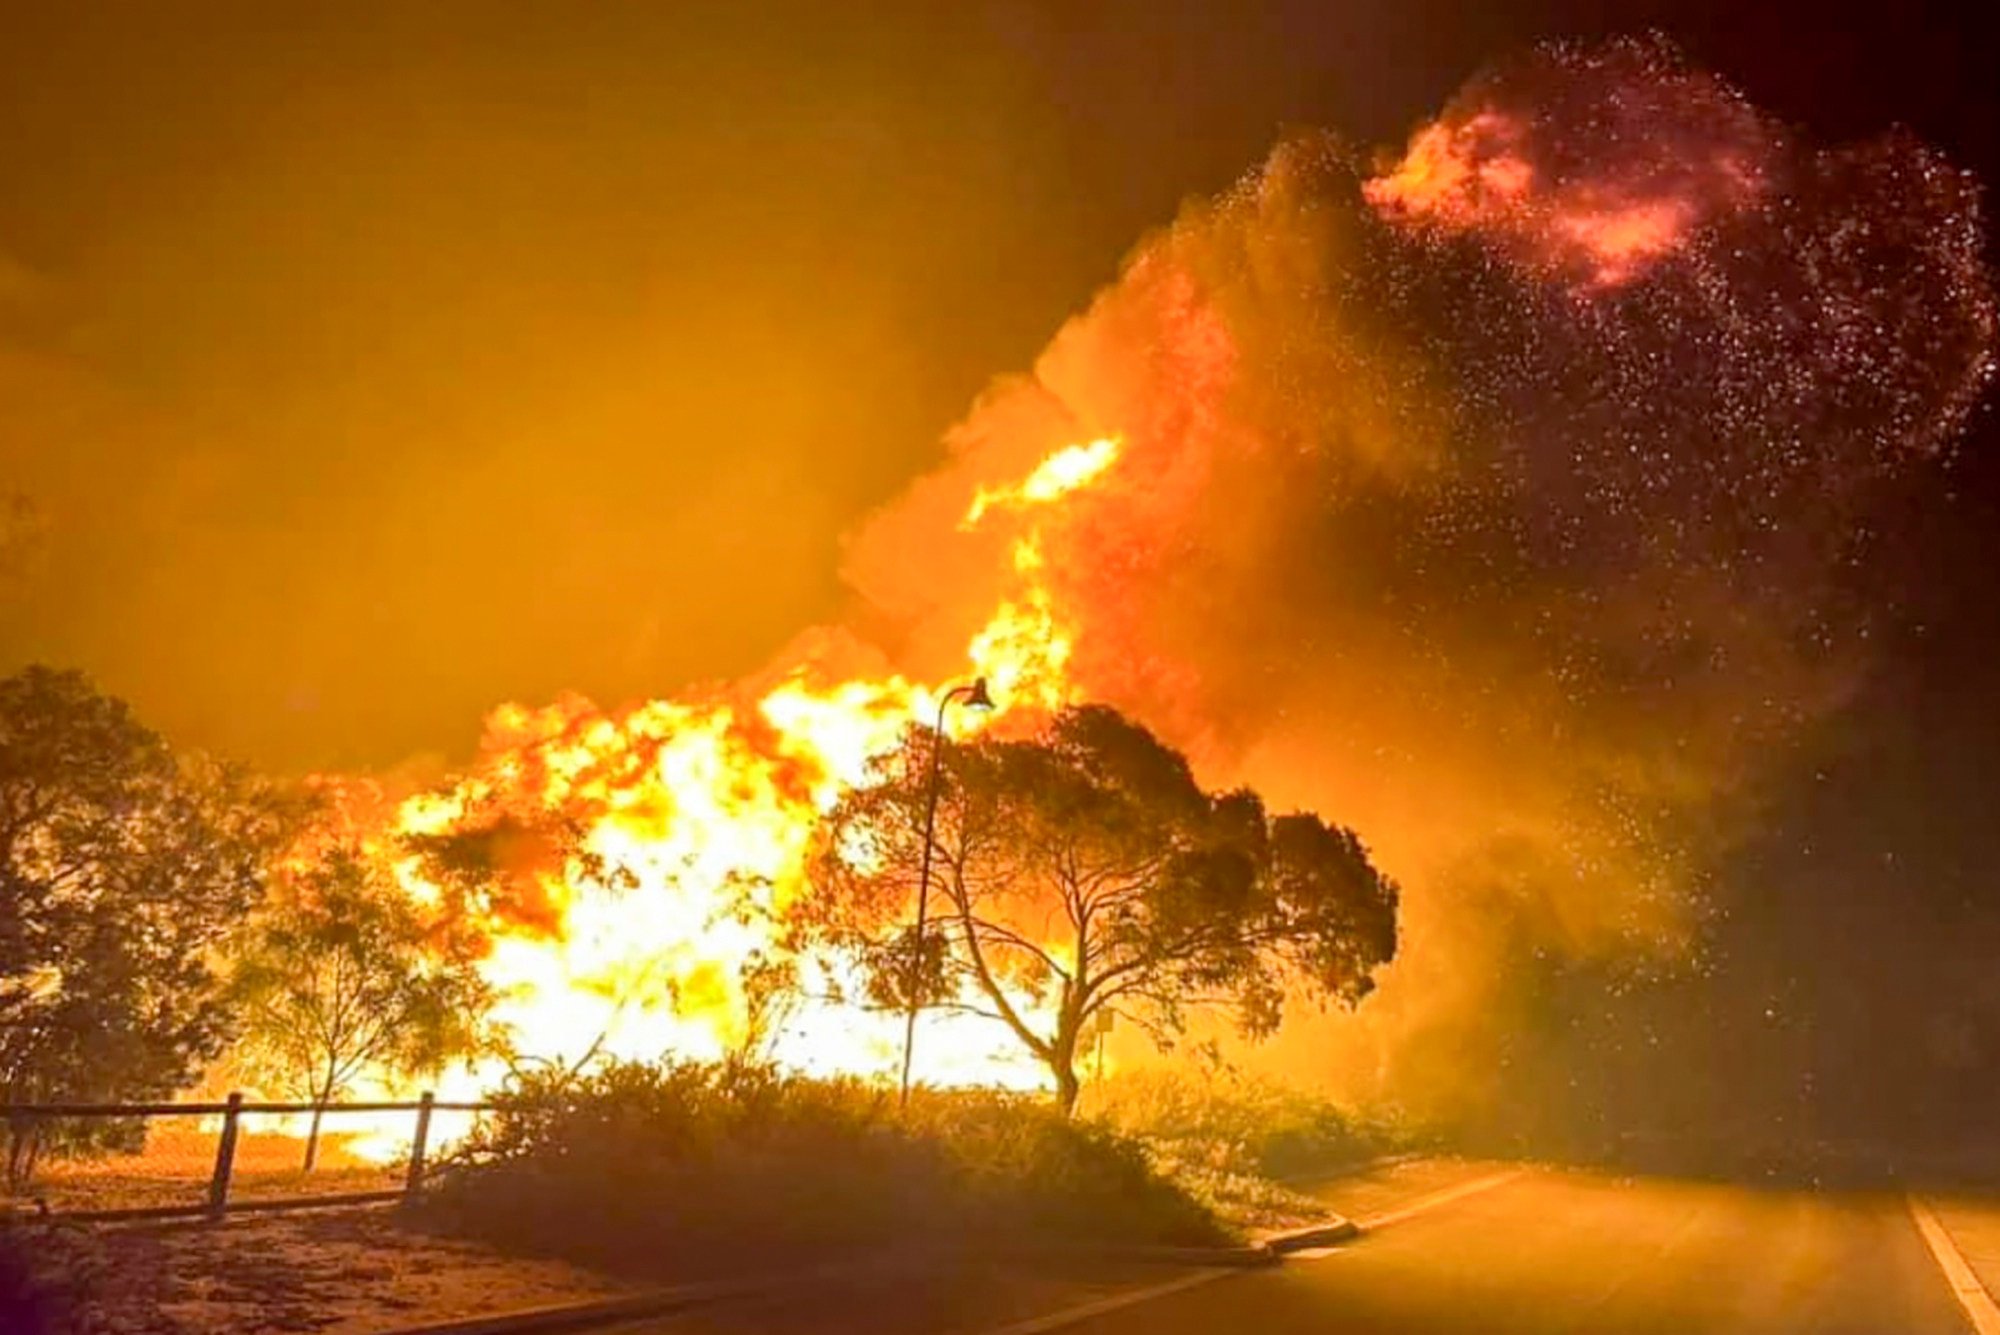 A wildfire burns during heatwave spring conditions in Western Australia in November. The frequency and intensity of heatwaves is forecast to increase as global temperatures rise under climate change. Photo: DFES via AP